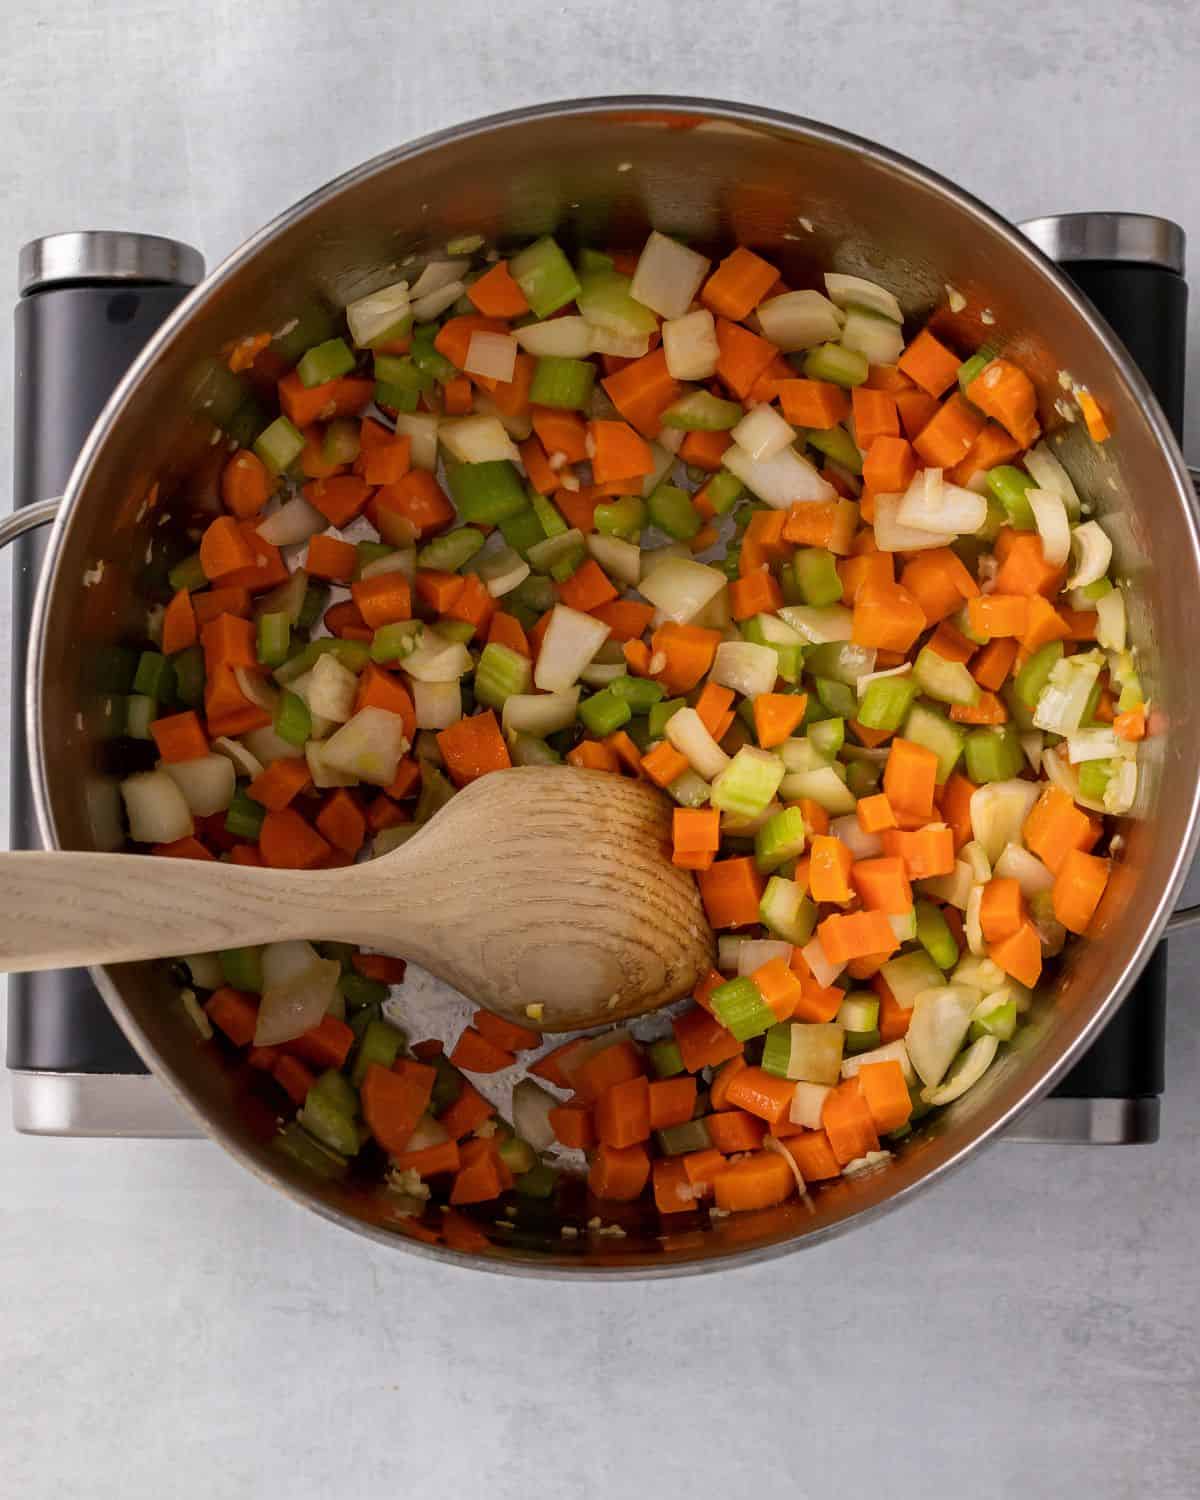 carrots, celery, and onions cooked in a pot.